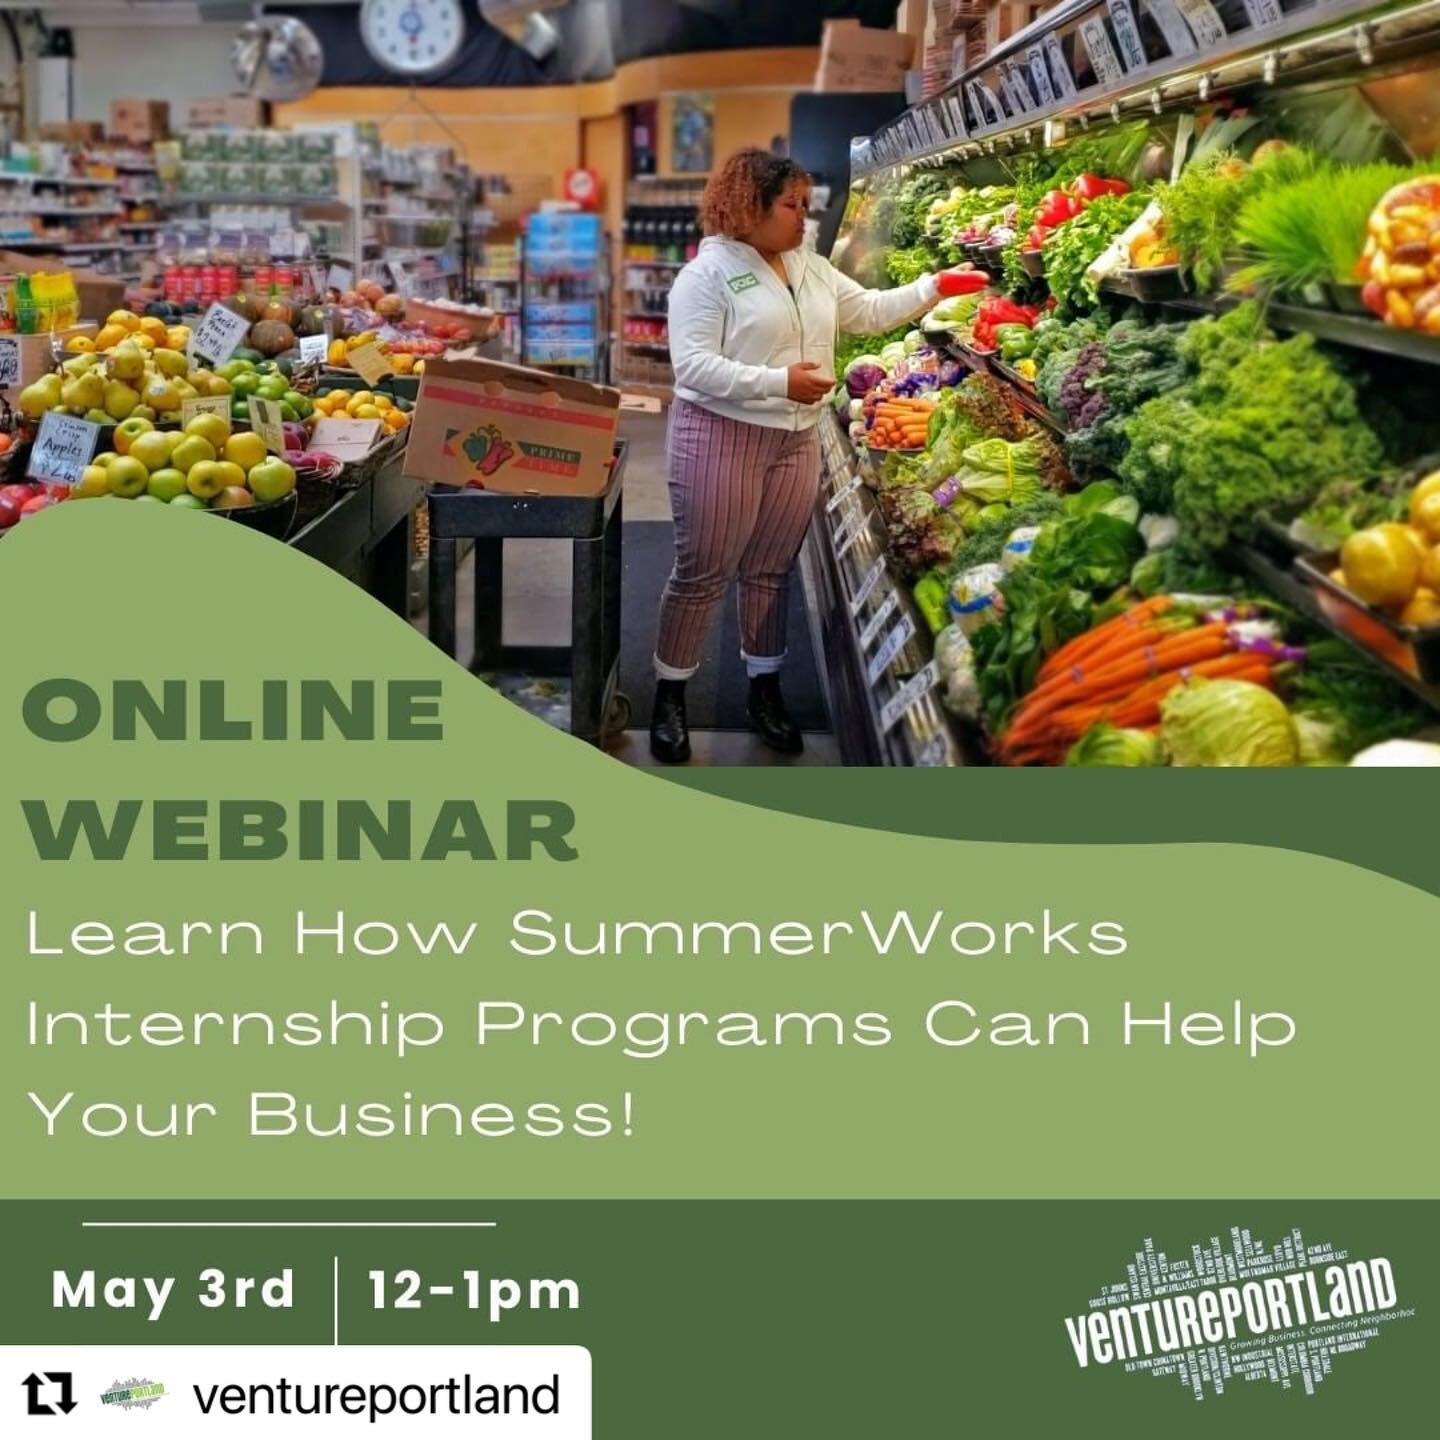 #Repost @ventureportland with @use.repost
・・・
Join us for this FREE webinar! 

Are you interested in hiring an intern to gain some valuable work experience at your business this summer? Worksystems' SummerWorks program provides paid work experiences 